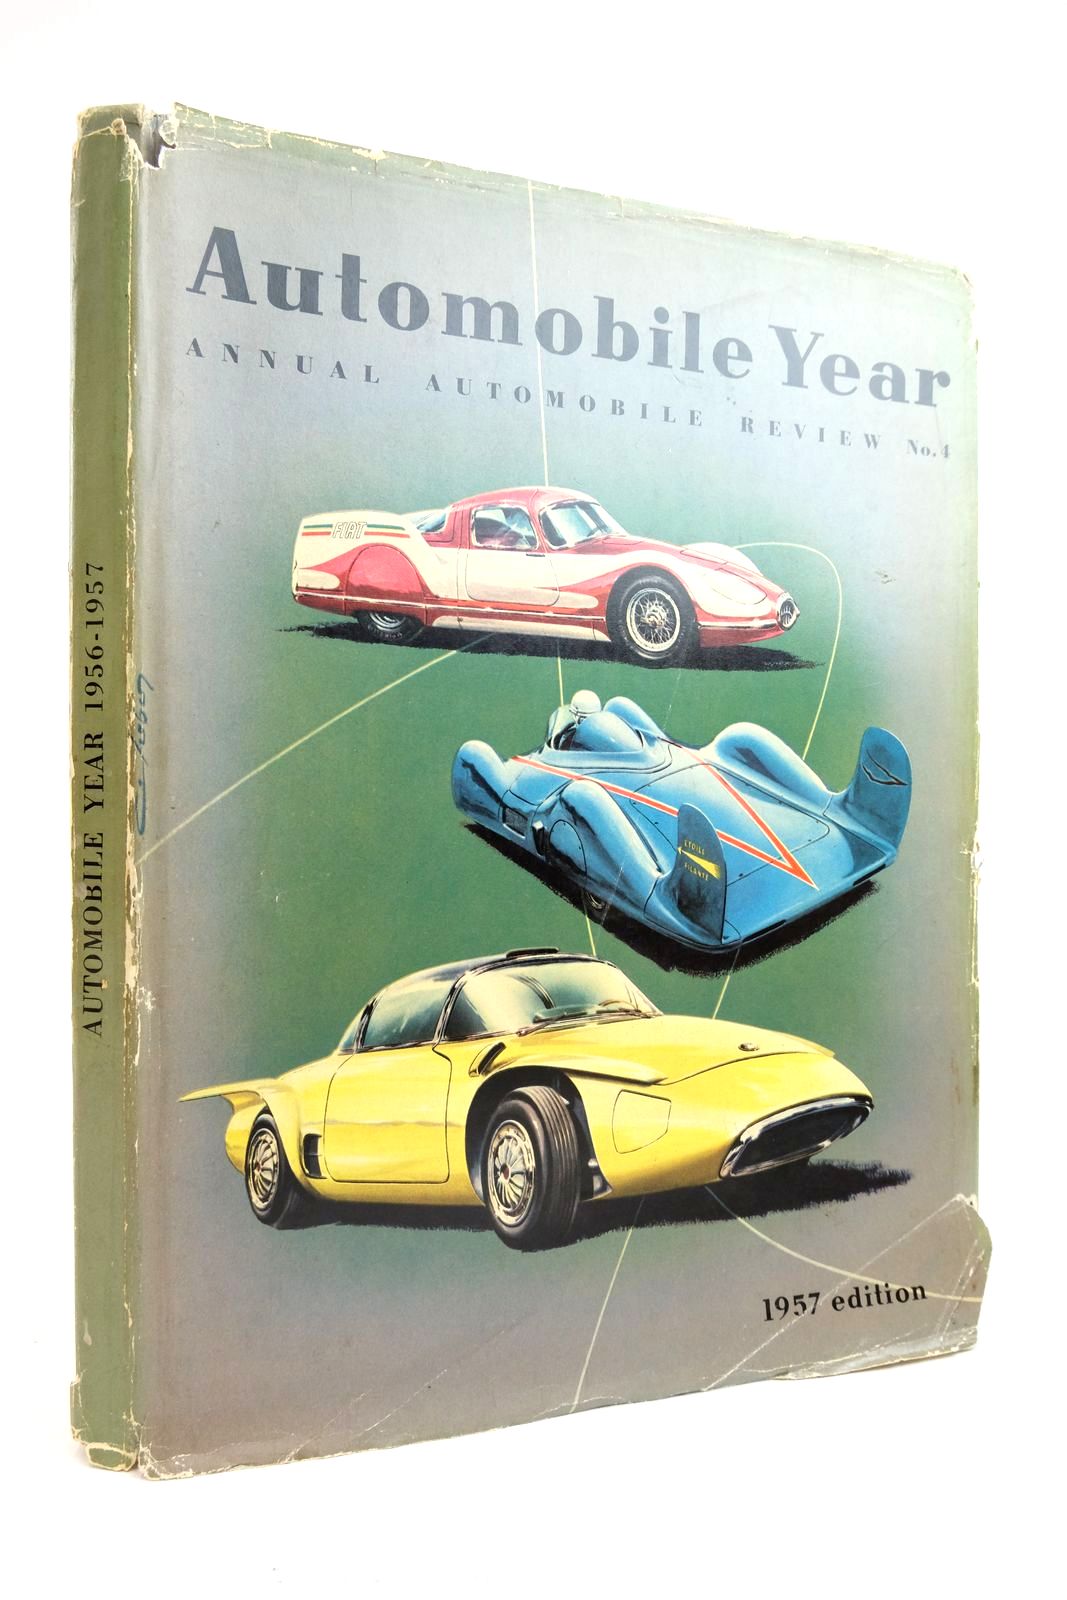 Photo of AUTOMOBILE YEAR 1956-1957 ANNUAL AUTOMOBILE REVIEW No. 4- Stock Number: 2135375